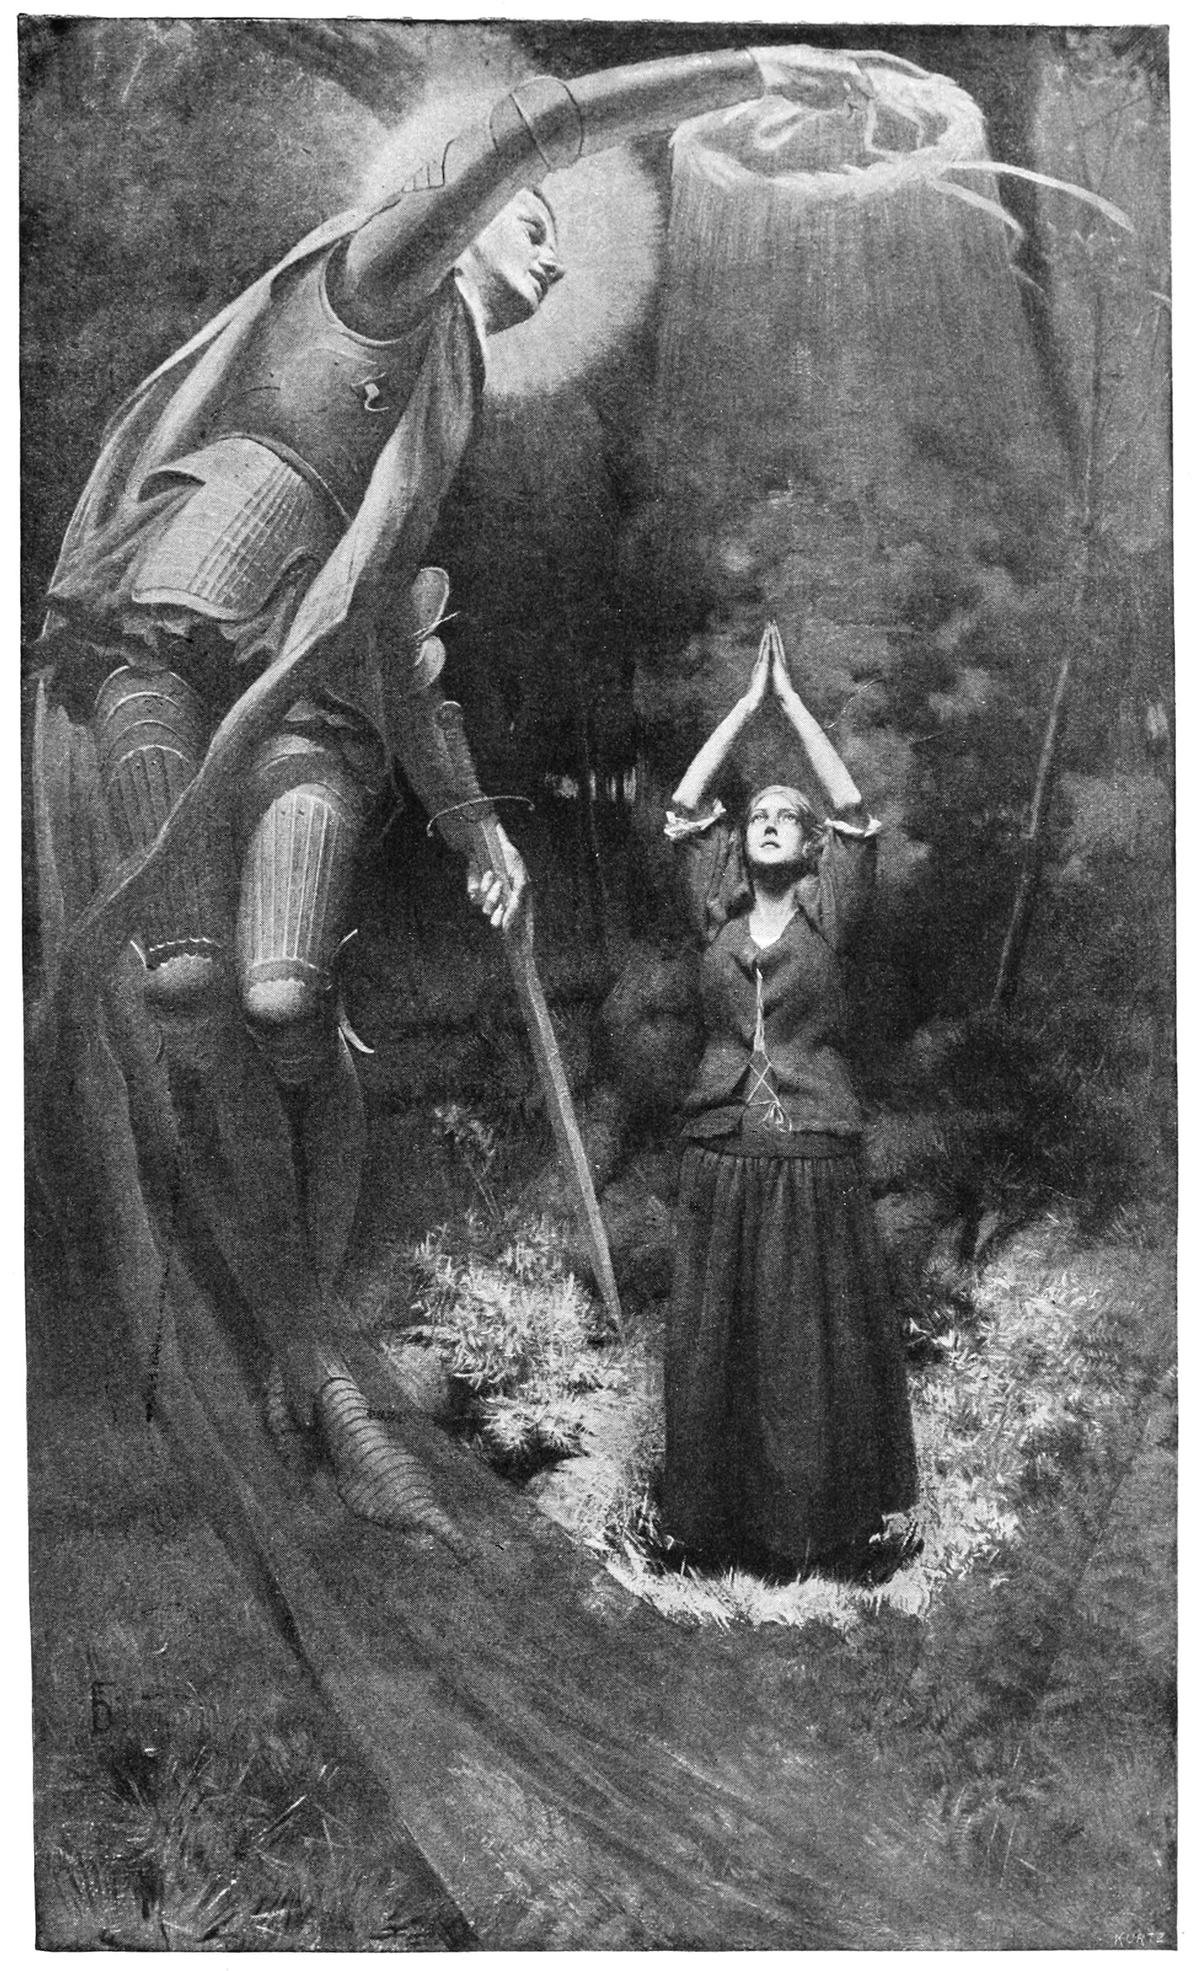 Illustrated plate titled "Joan's Vision" from the "Personal Recollections of Joan of Arc," by Mark Twain in 1896. (Public Domain)